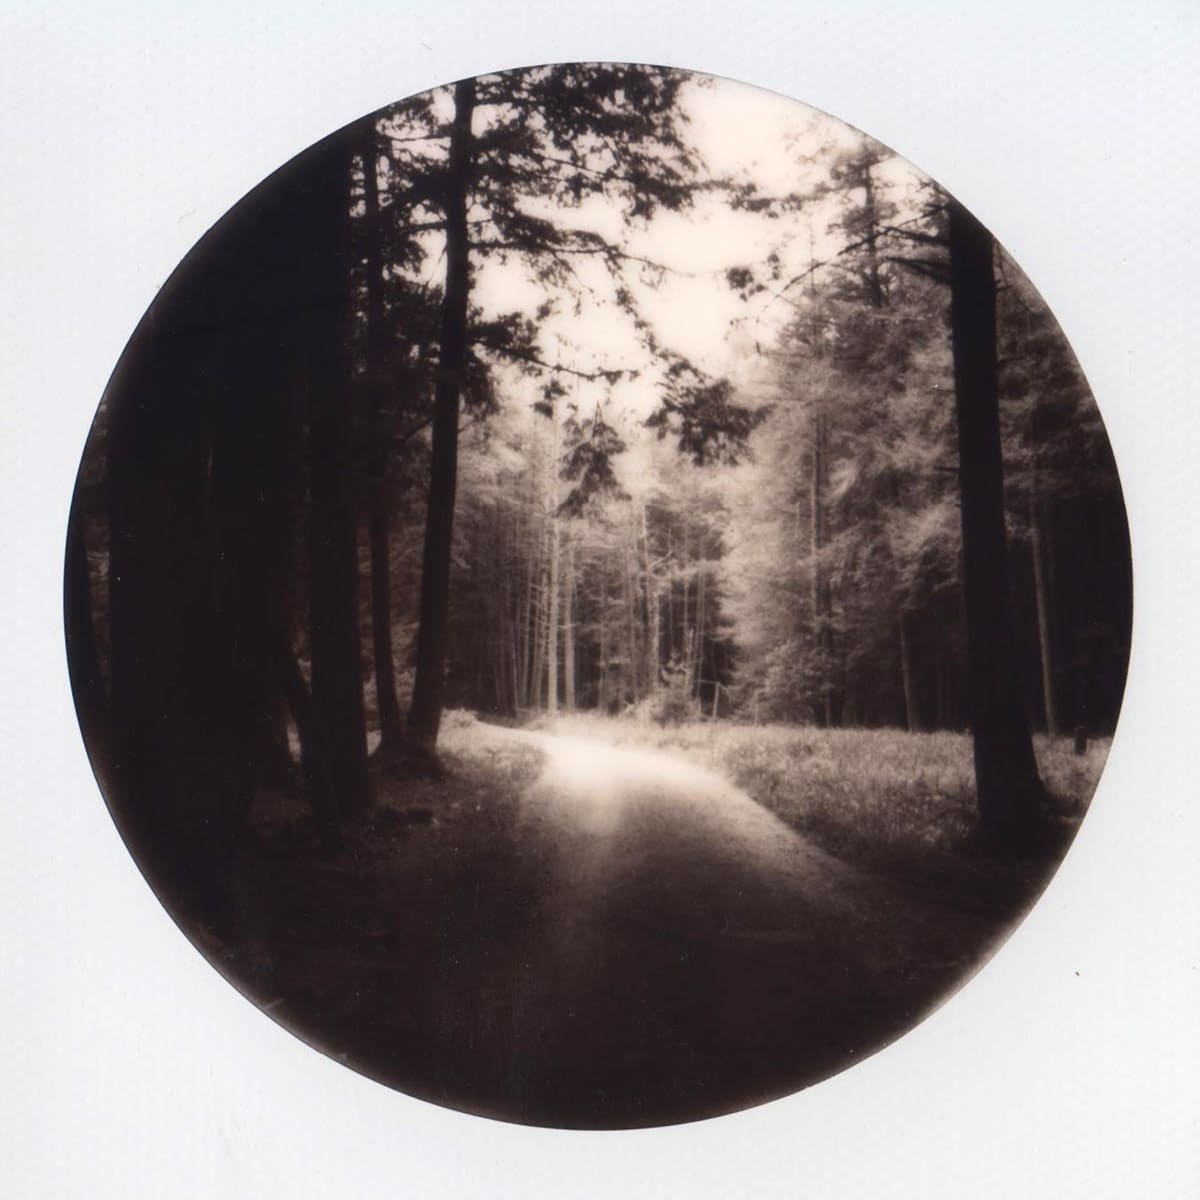 Cook's Forest - Polaroid SX-70 and Impossible Project Round Frame film